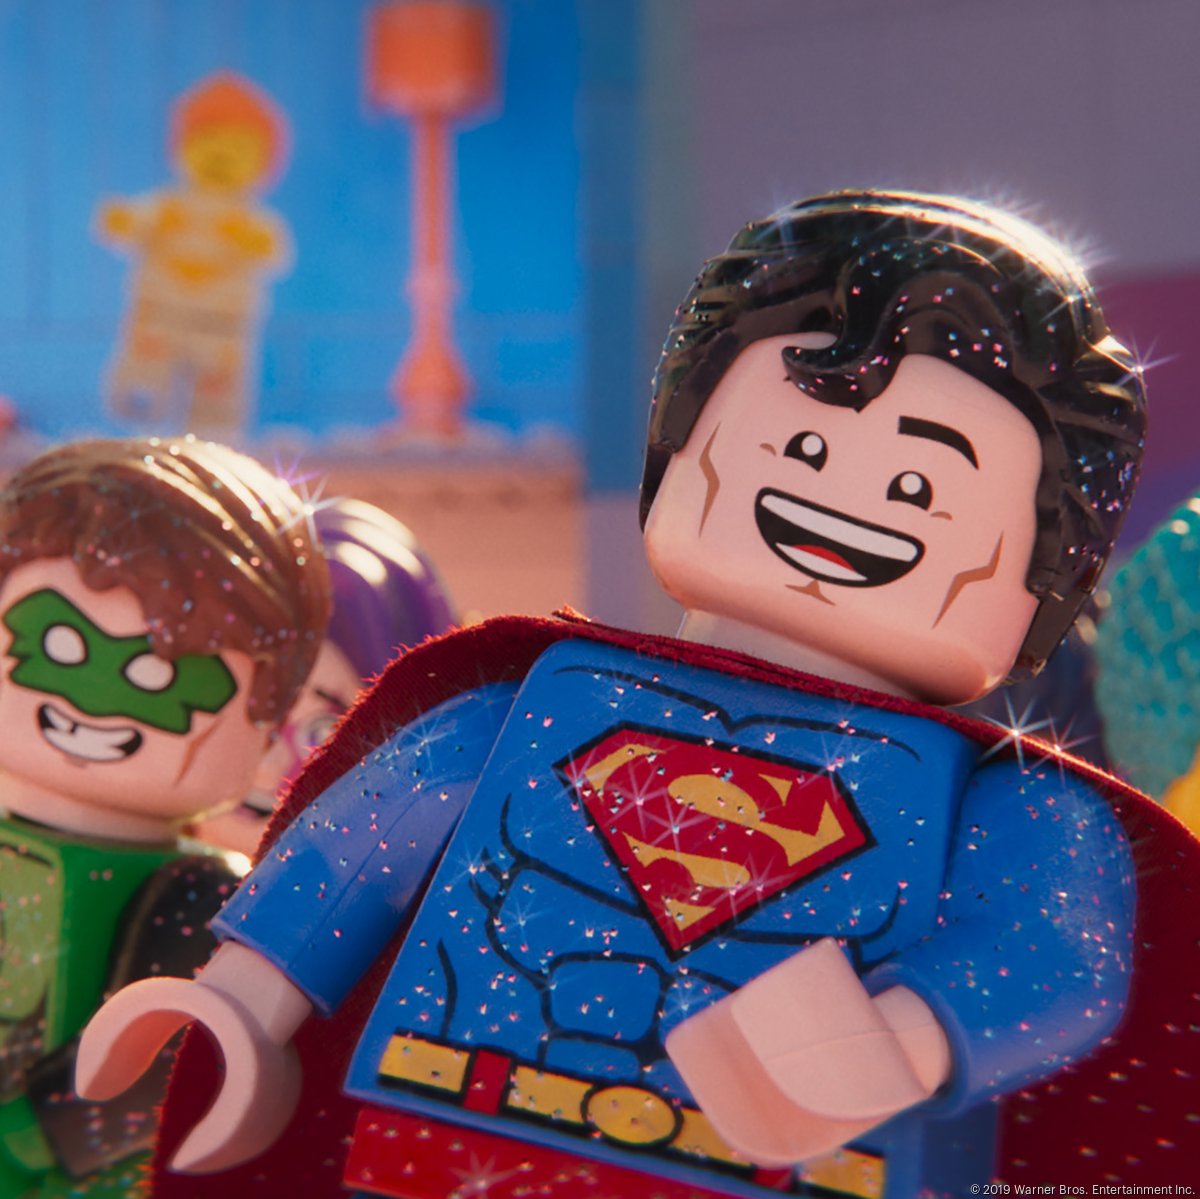 Lego Movie 2 Release Date Pushed Back To 2019